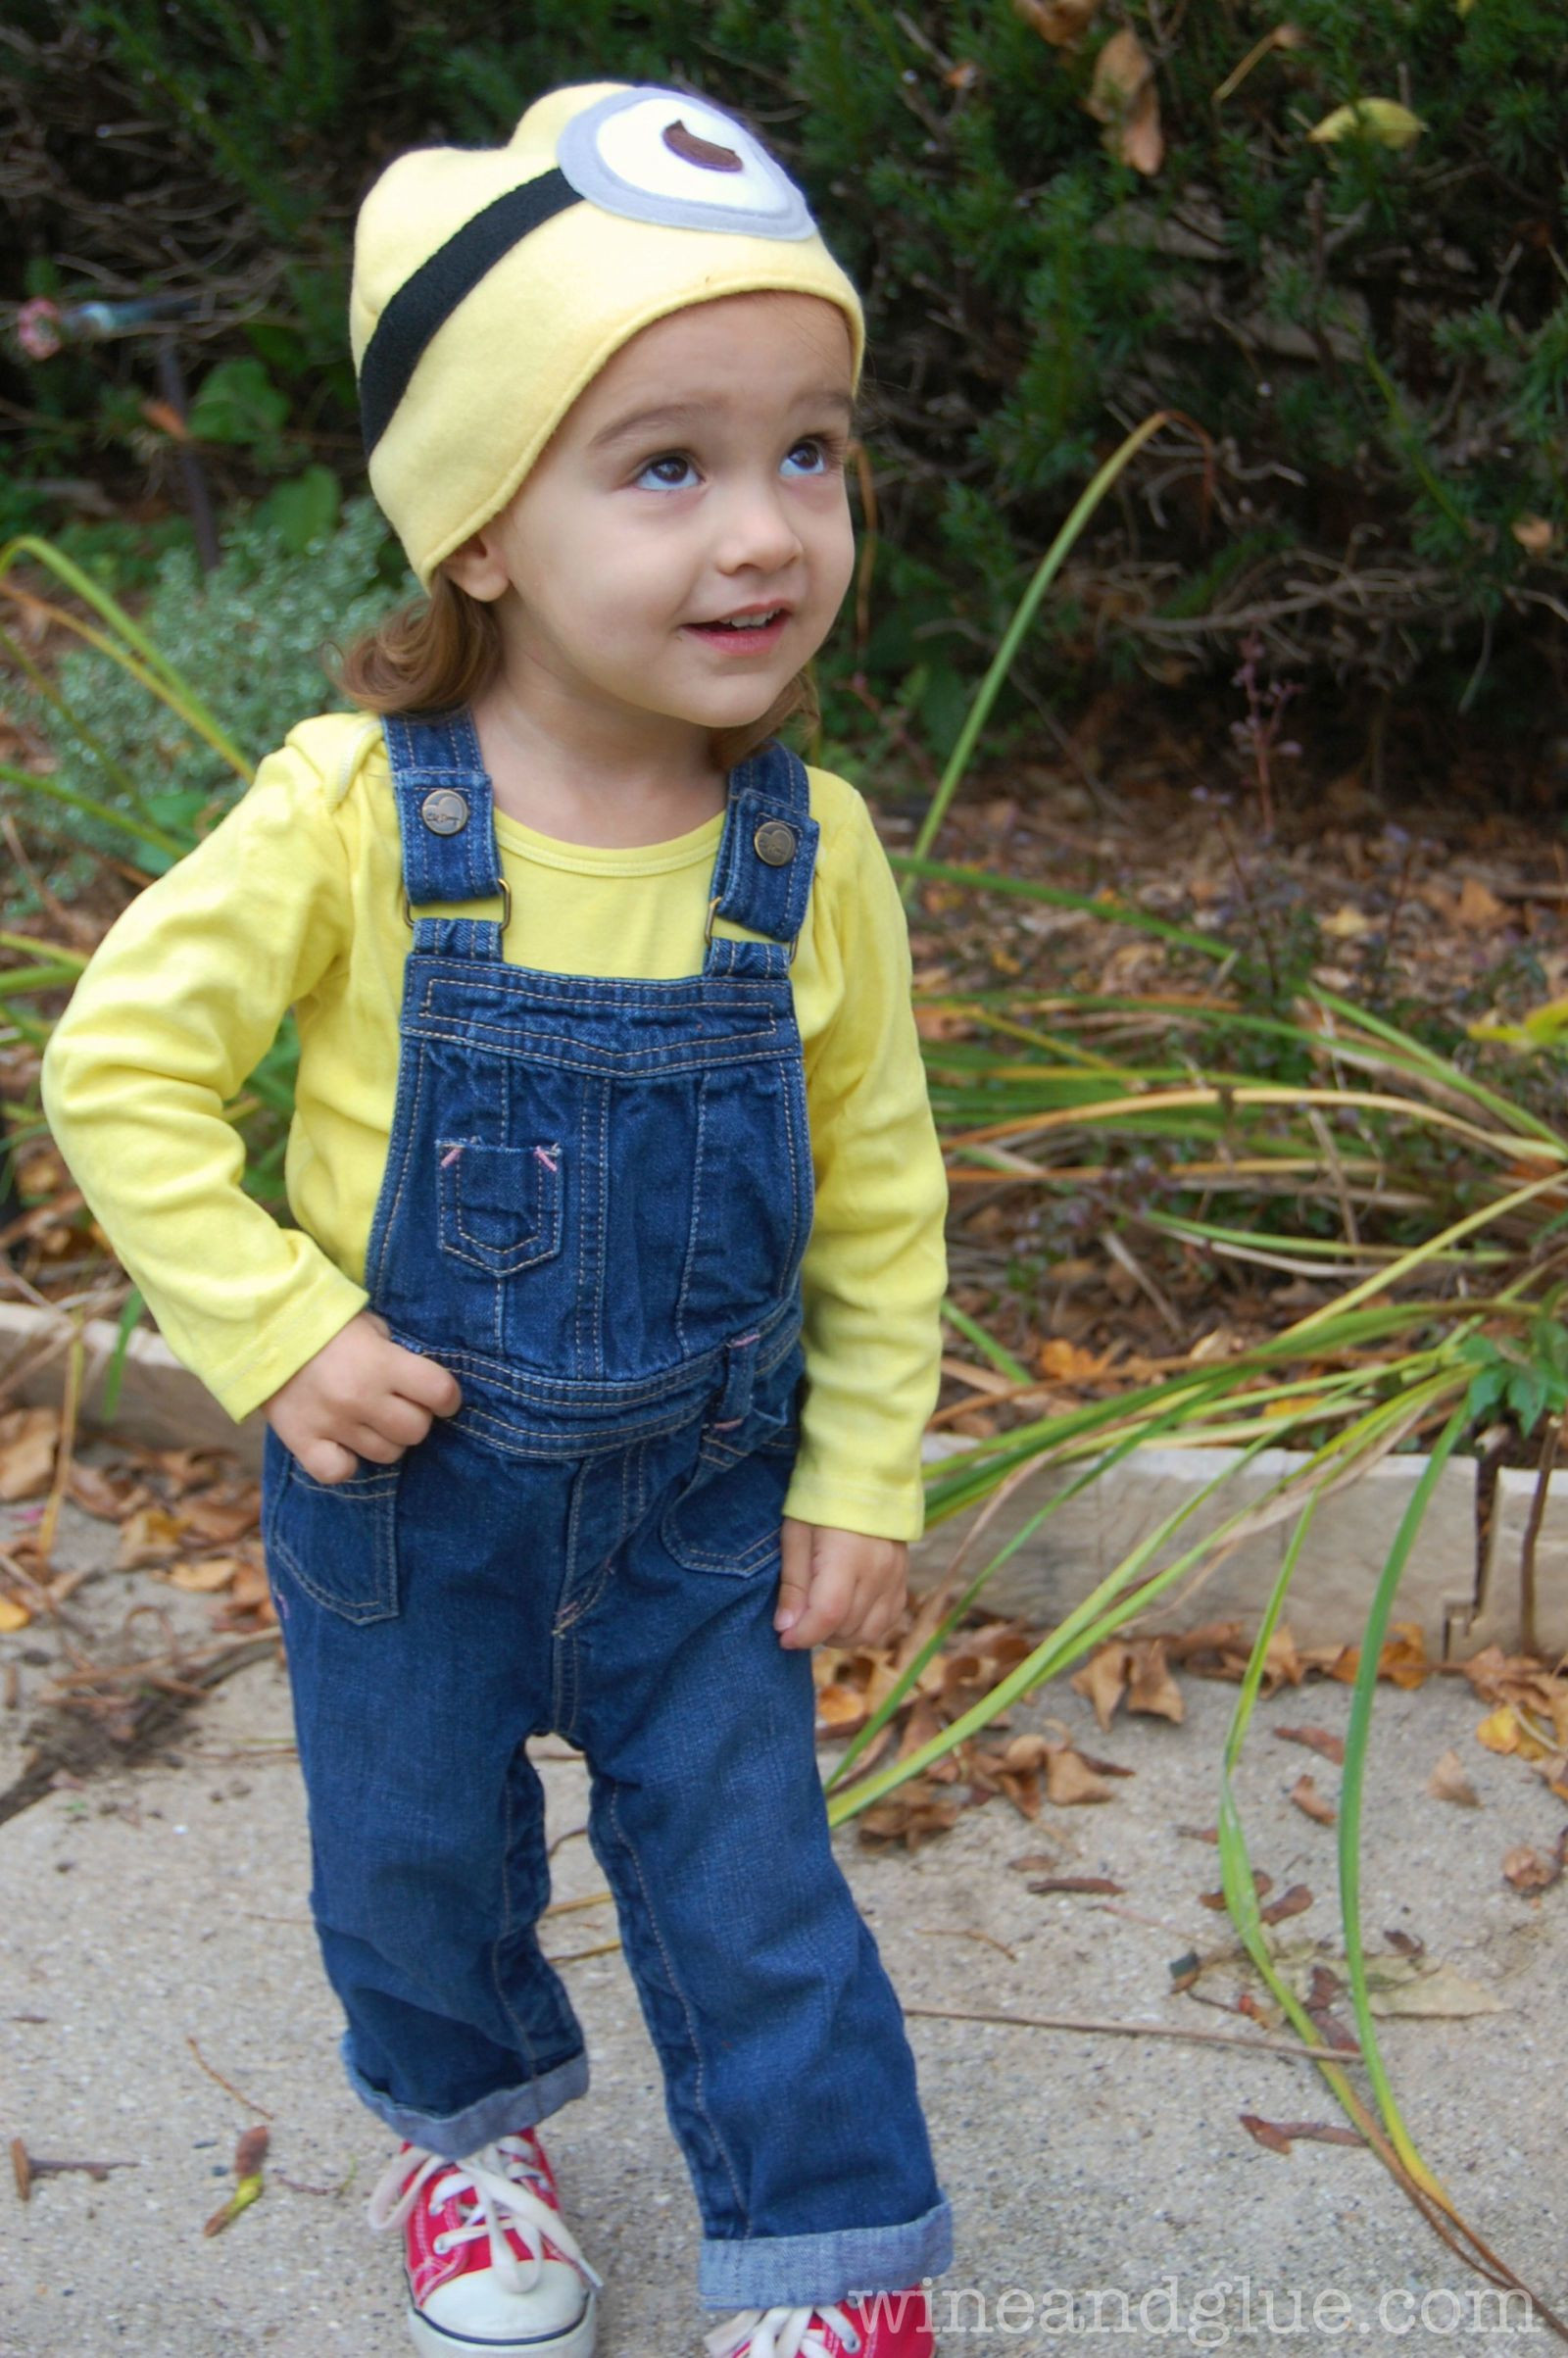 DIY Minion Costumes For Kids
 10 Simple and Simply Adorable DIY Kids Halloween